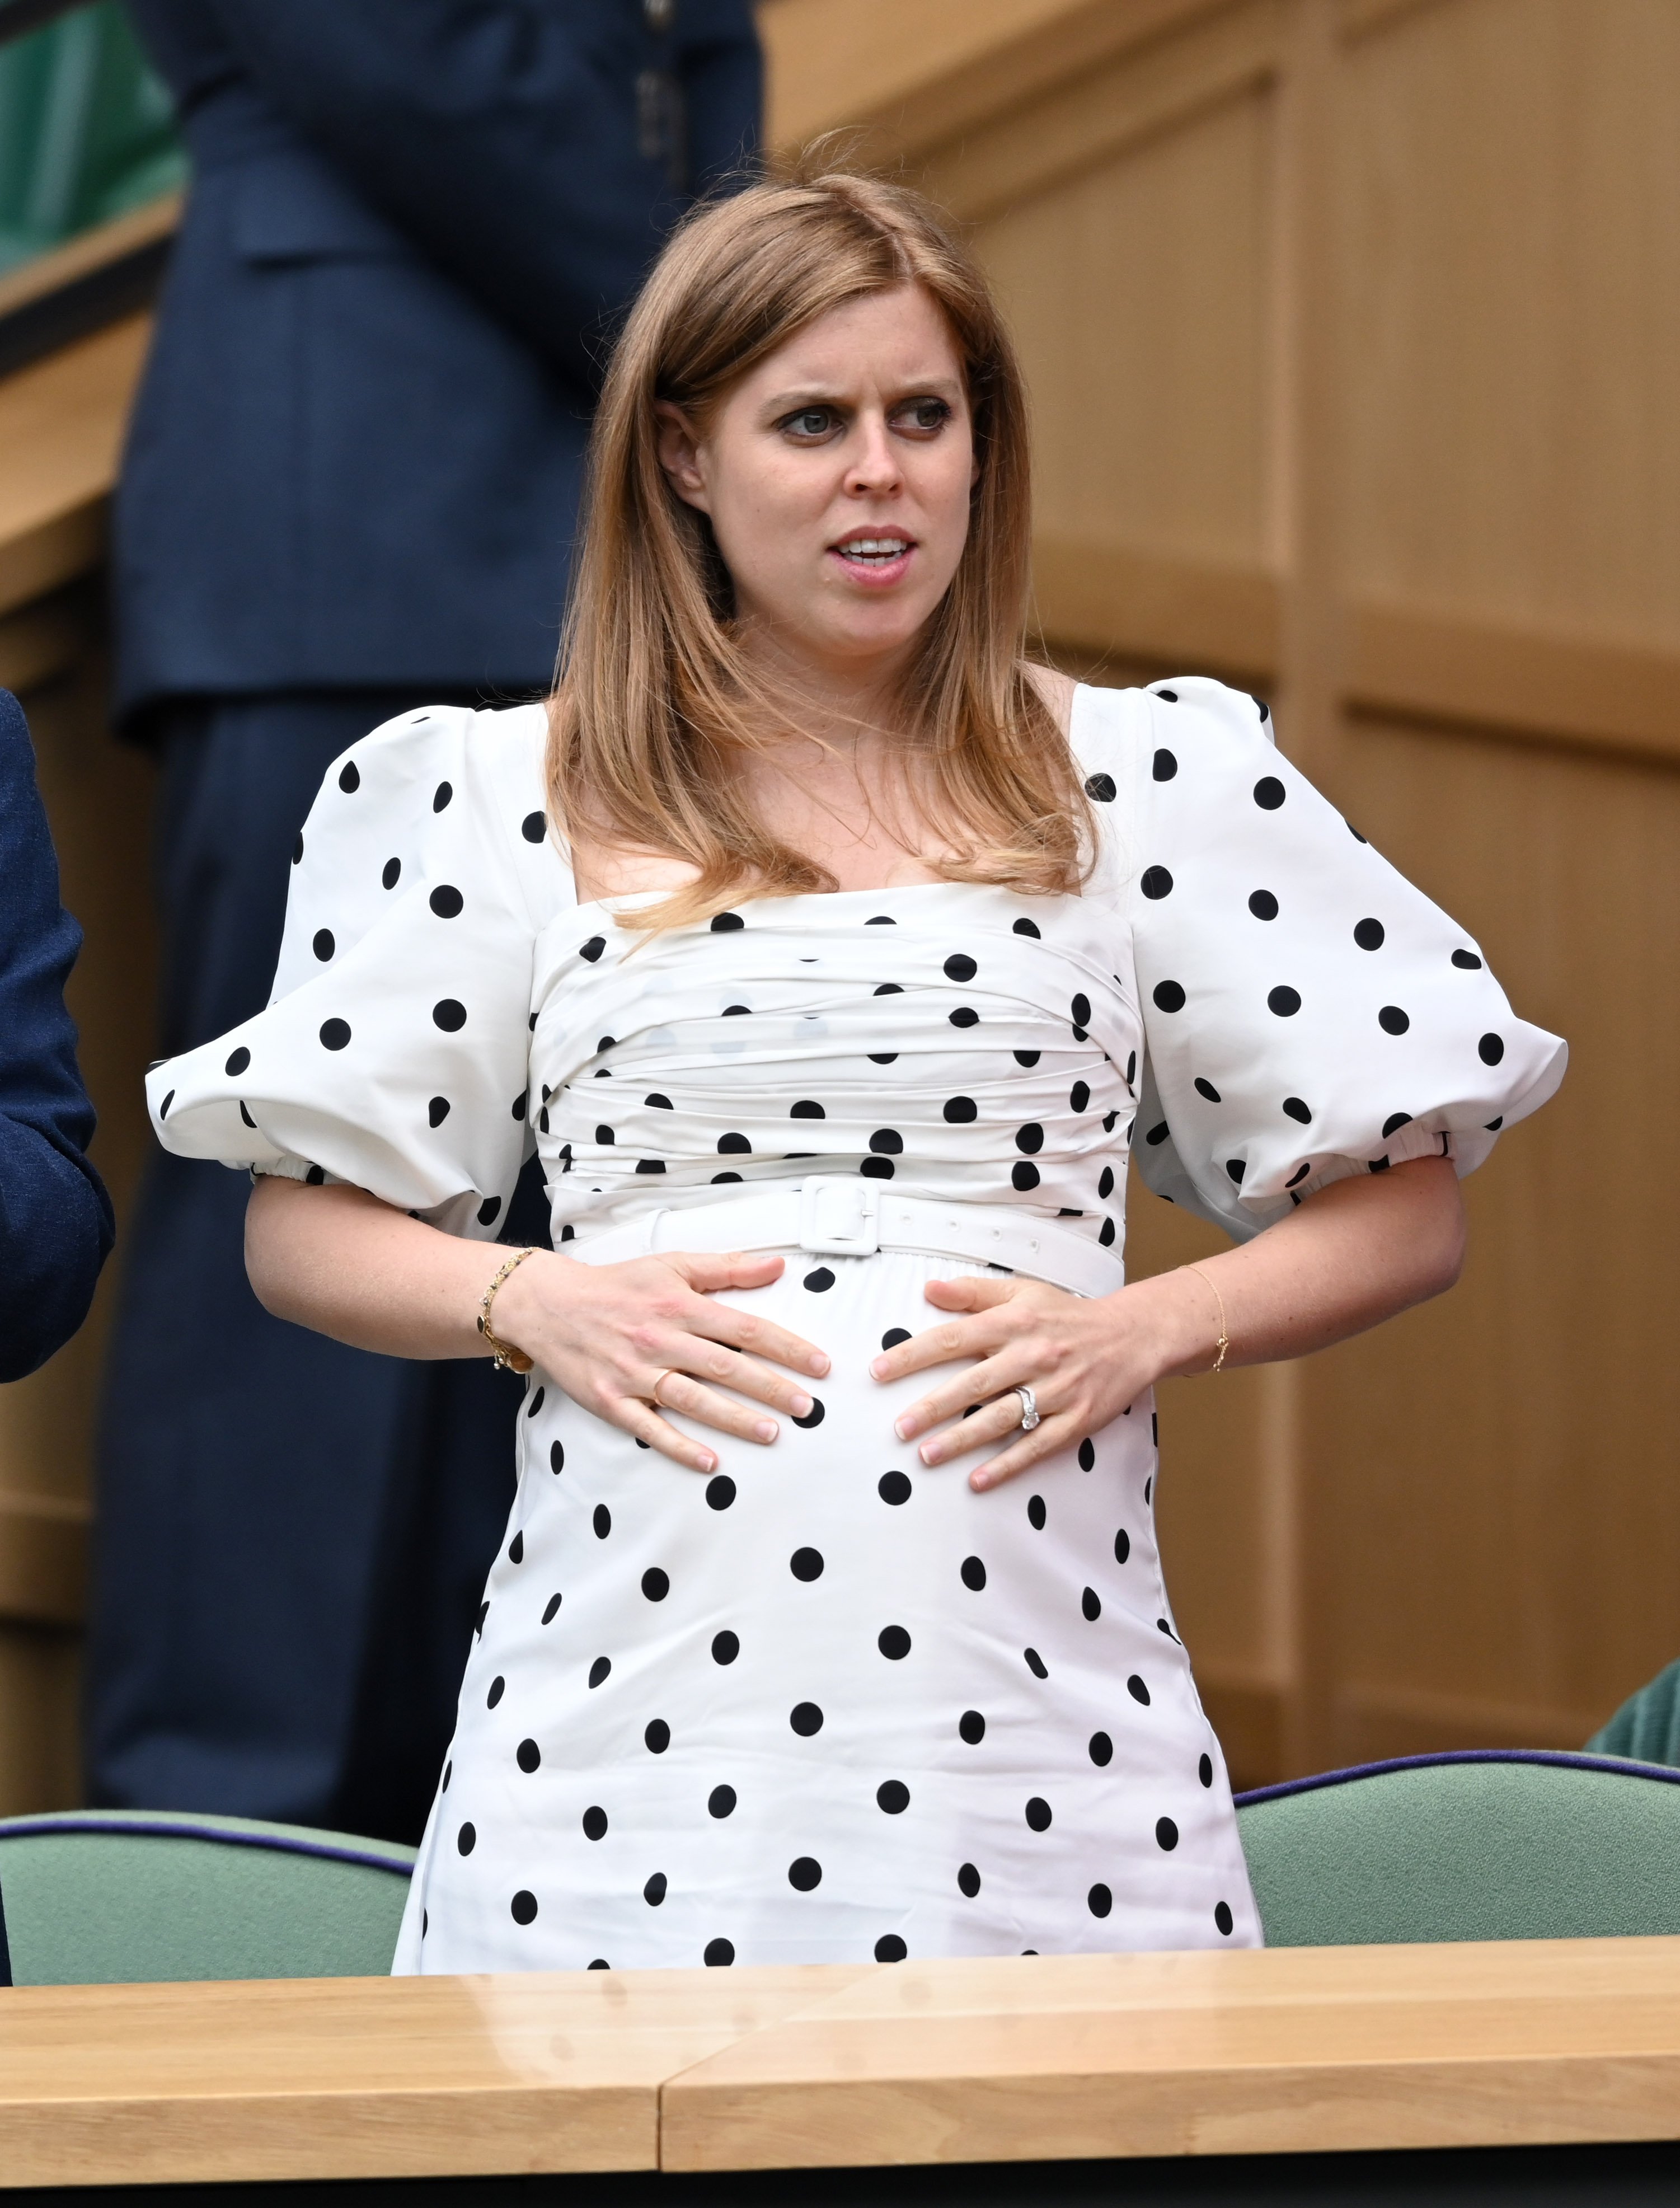 Princess Beatrice of York attends day 10 of the Wimbledon Tennis Championships at the All England Lawn Tennis and Croquet Club on July 08, 2021 in London, England.| Source: Getty Images